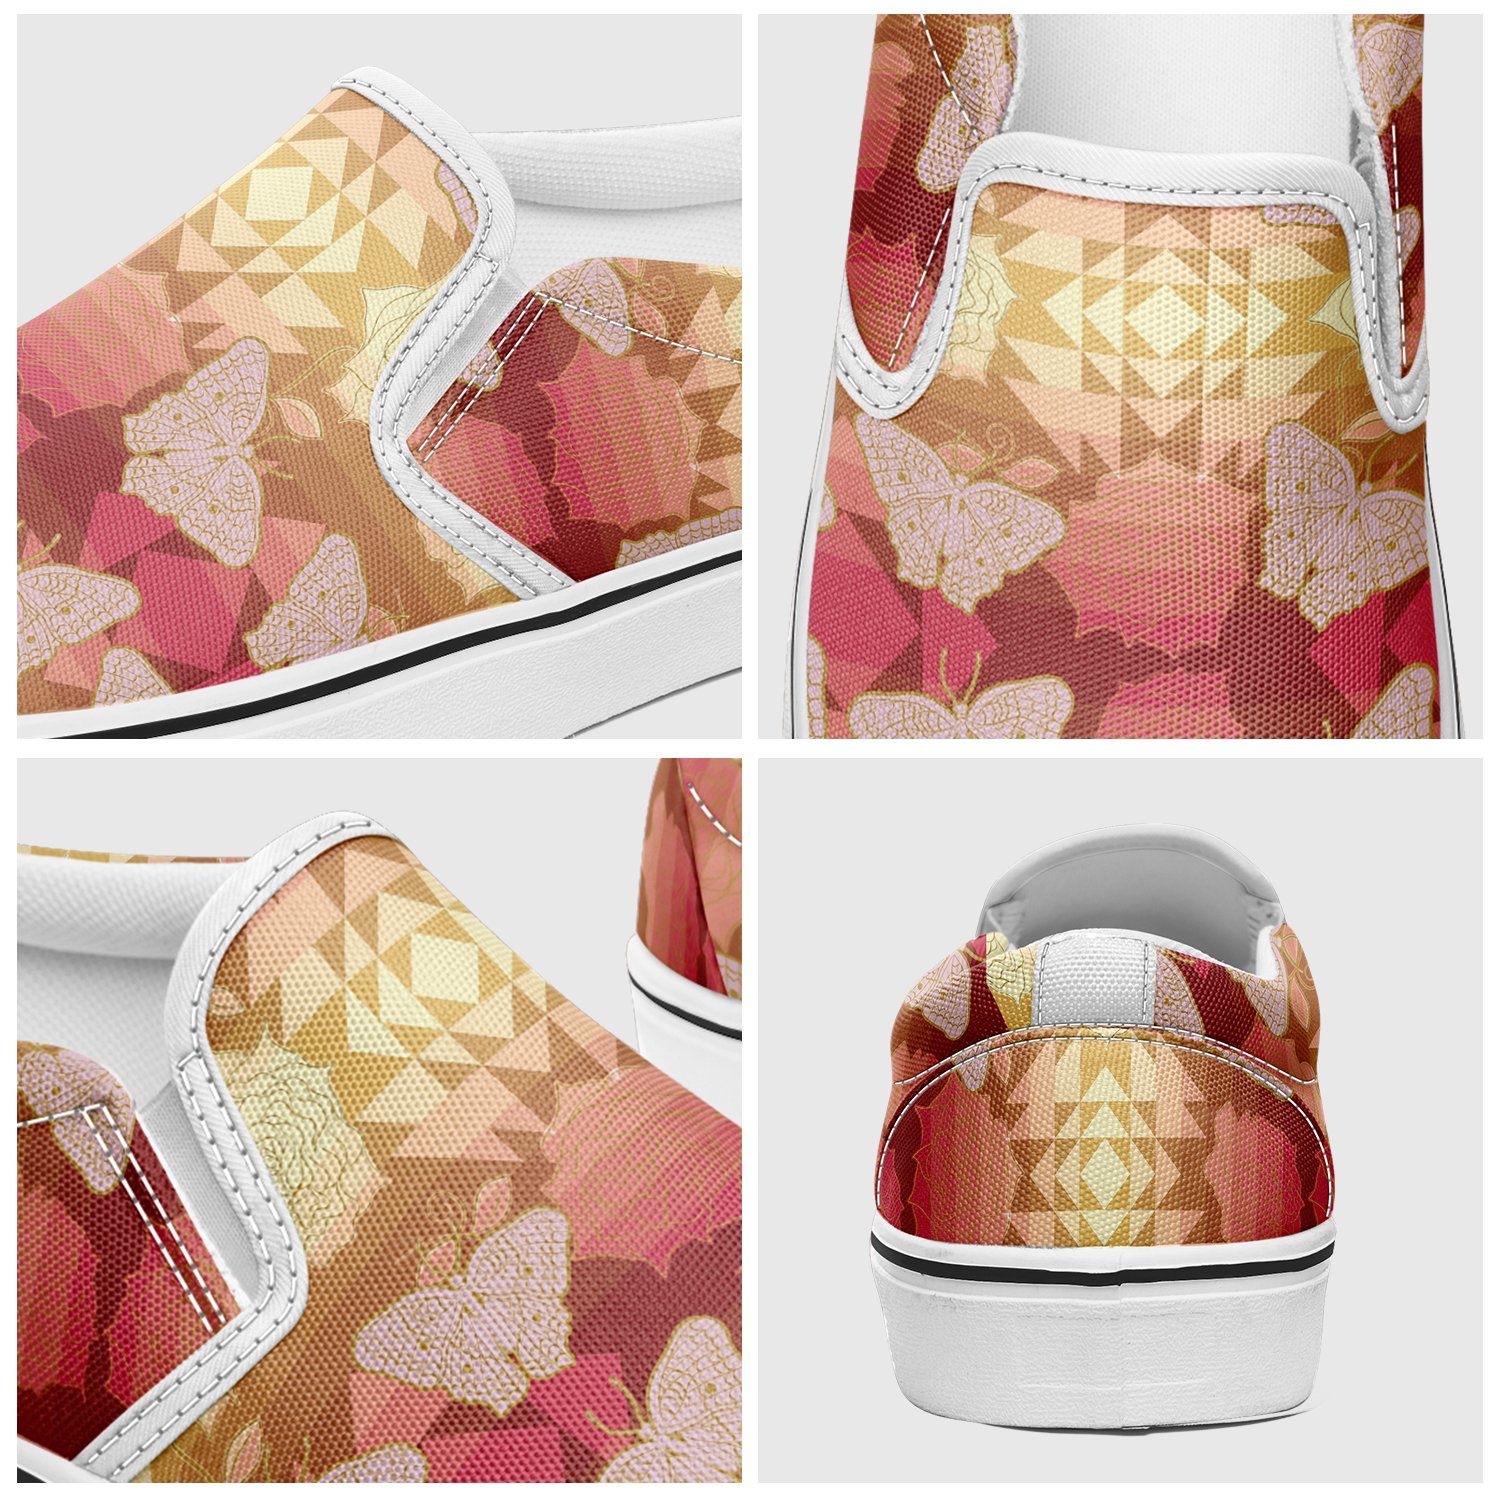 Butterfly and Roses on Geometric Otoyimm Kid's Canvas Slip On Shoes otoyimm Herman 